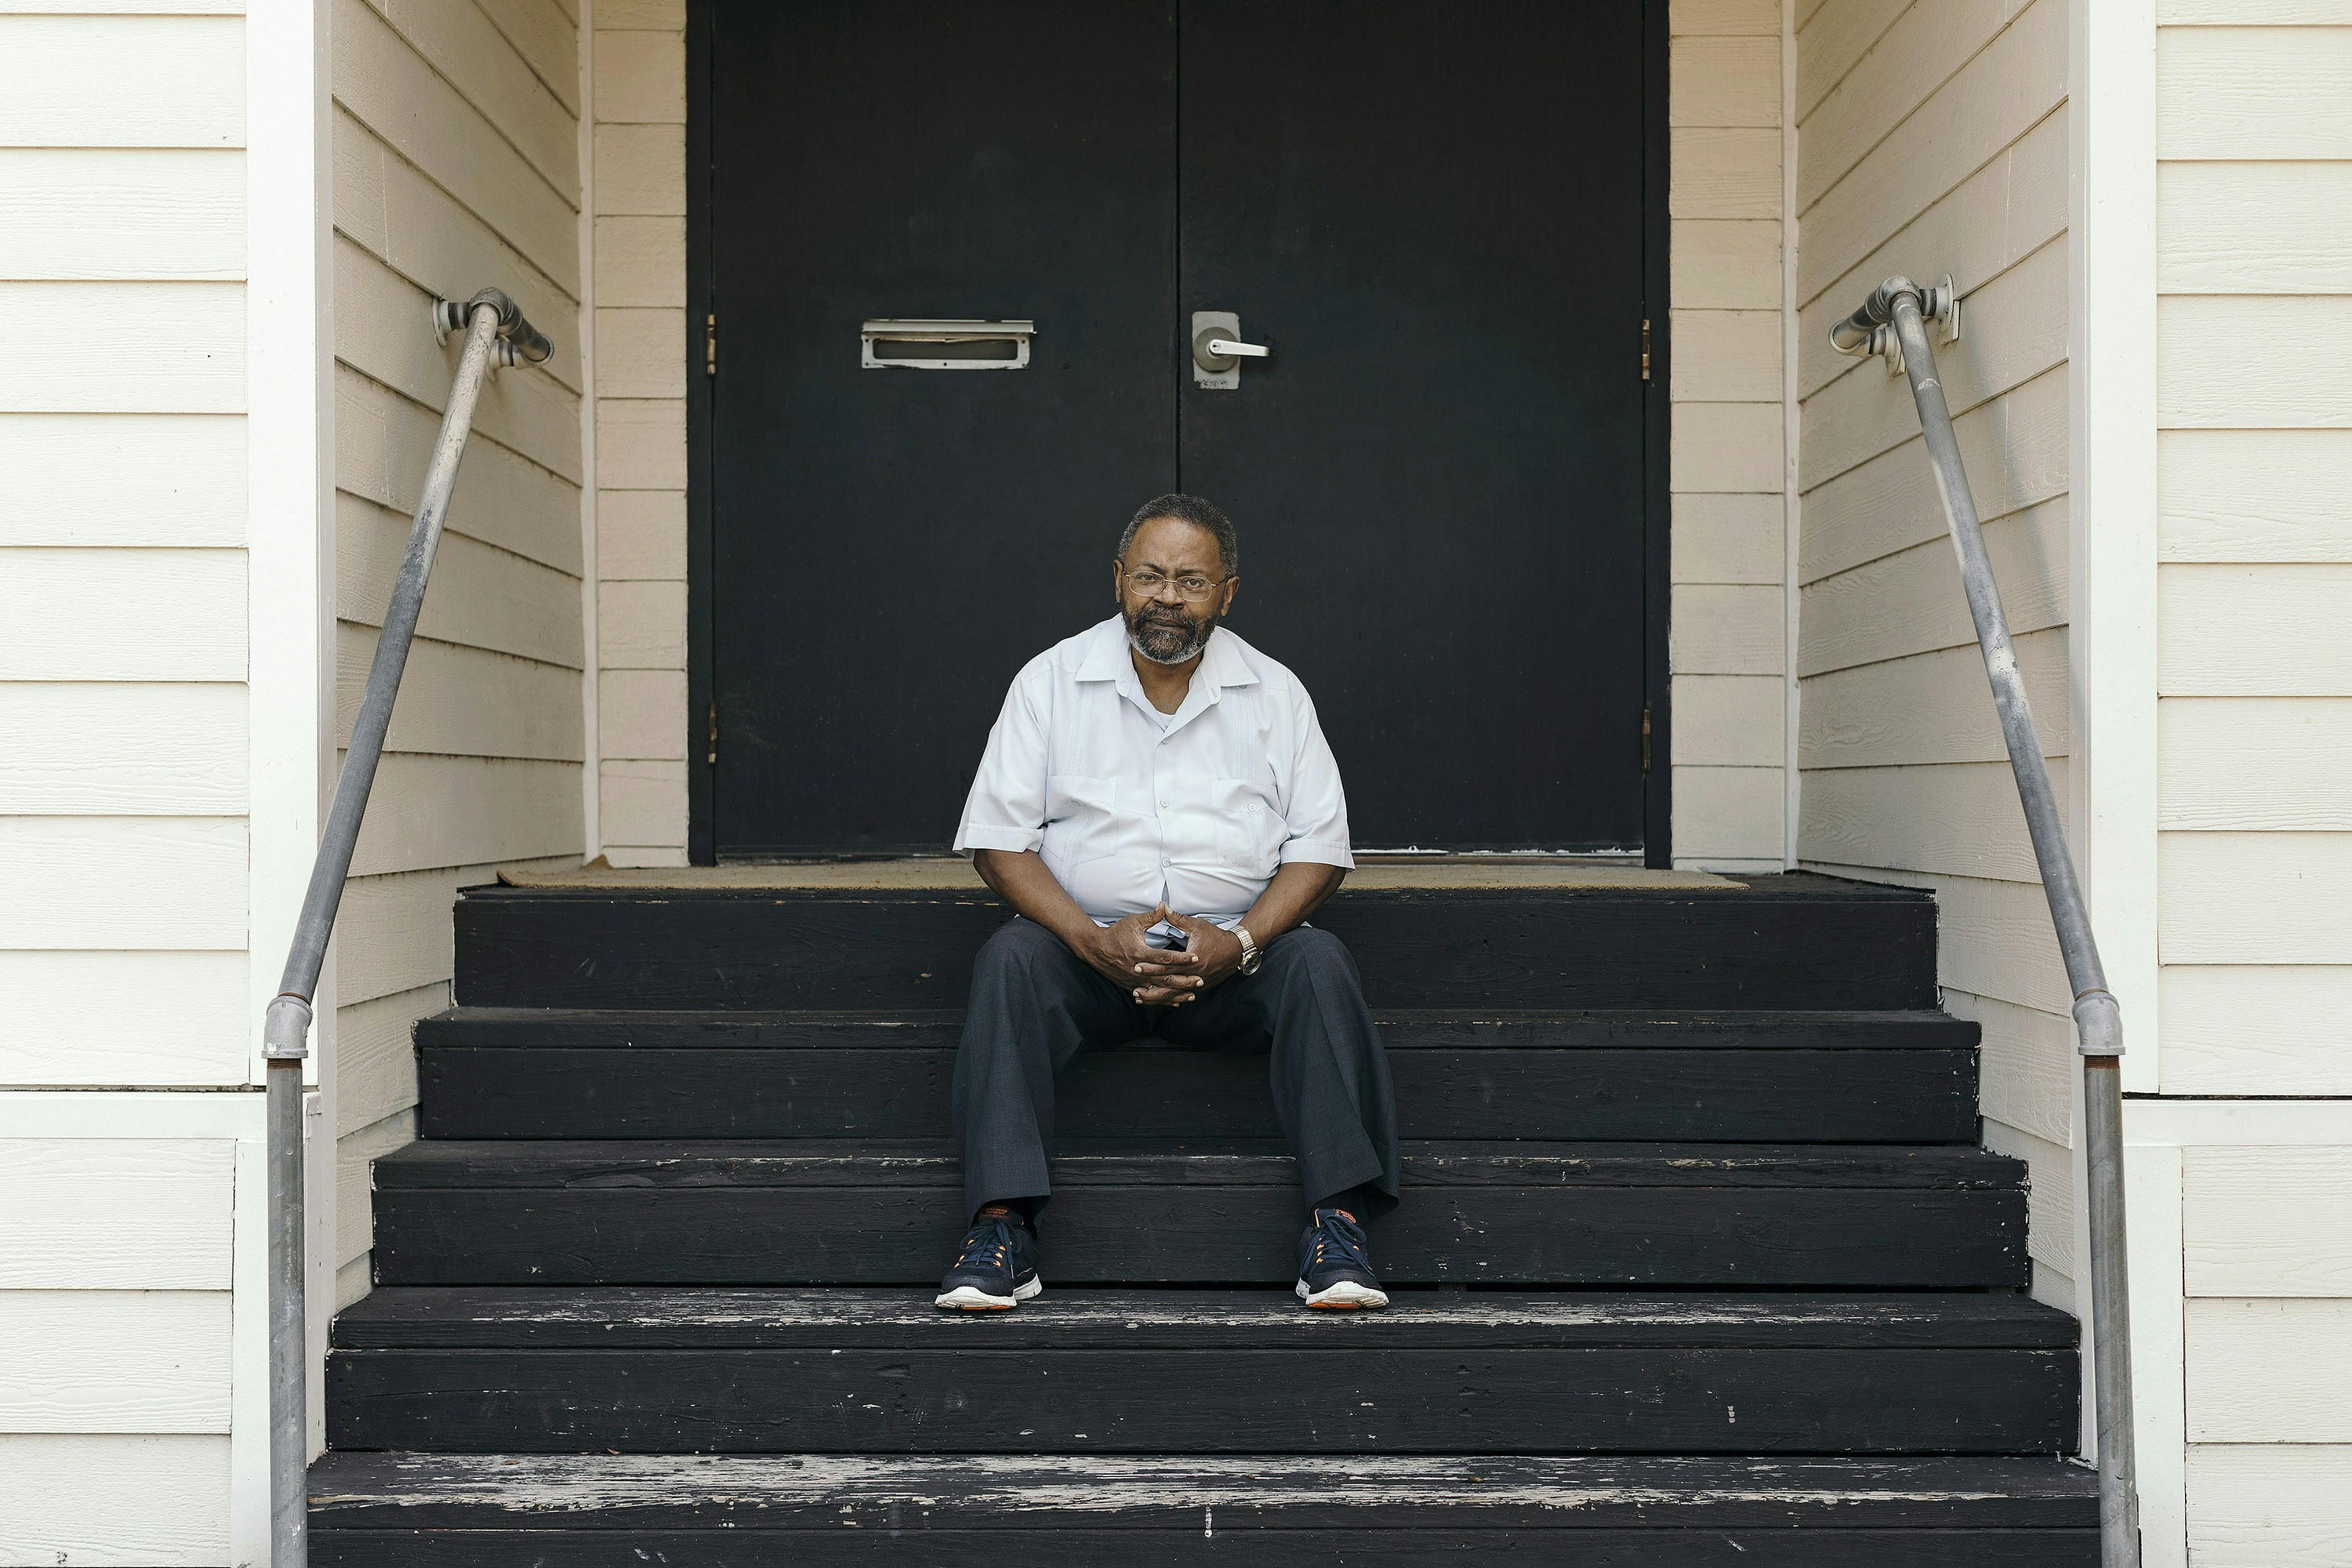 Reverend Roy L. Malveaux of Shining Star Baptist Church sits on the steps of his church, Tuesday, June 6th, 2017 in Beaumont, Texas.Todd Spoth for The Intercept